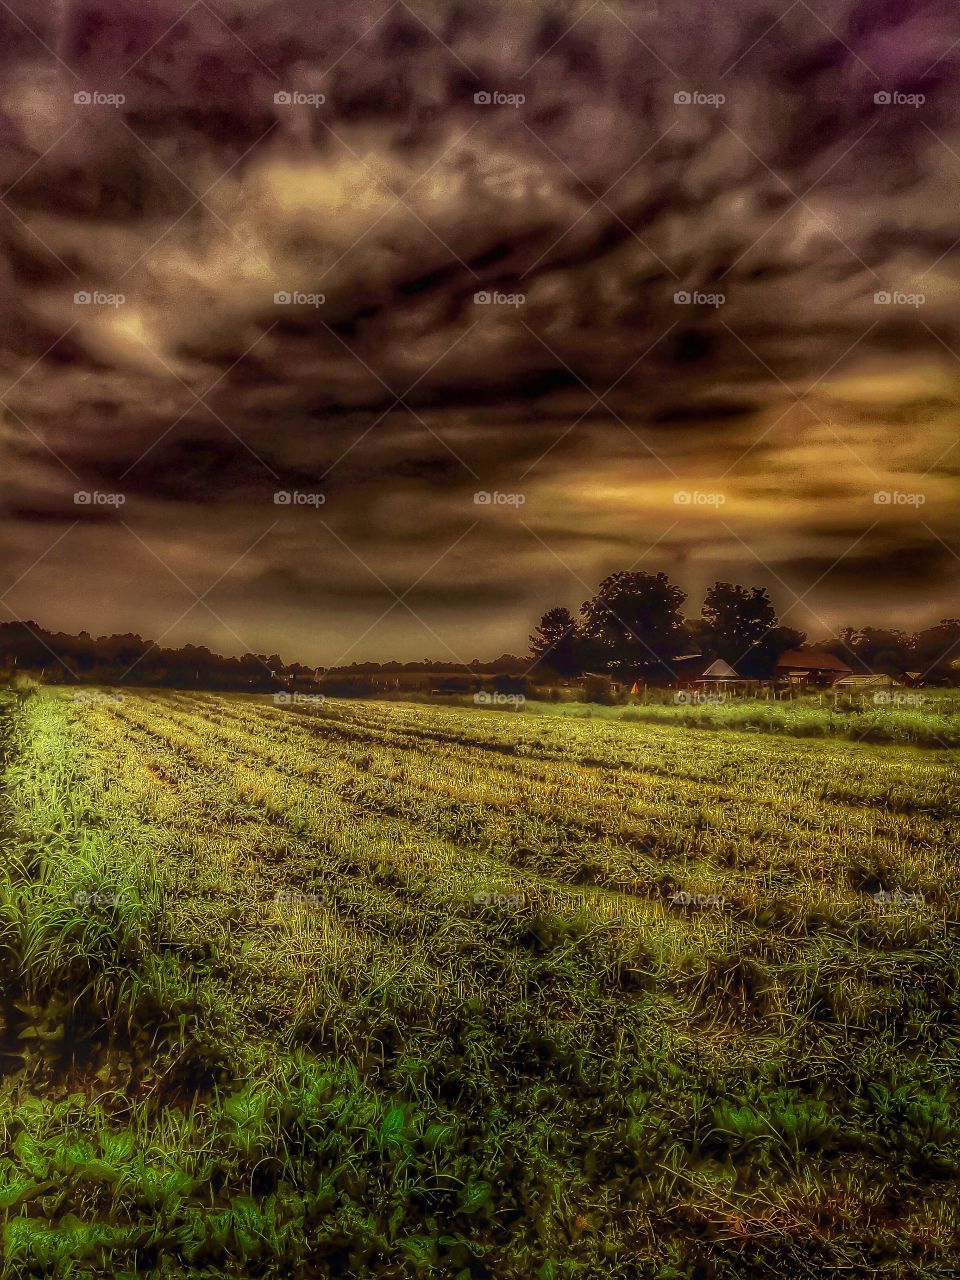 A storm at dusk. A deadly storm over the countryside at dusk. 